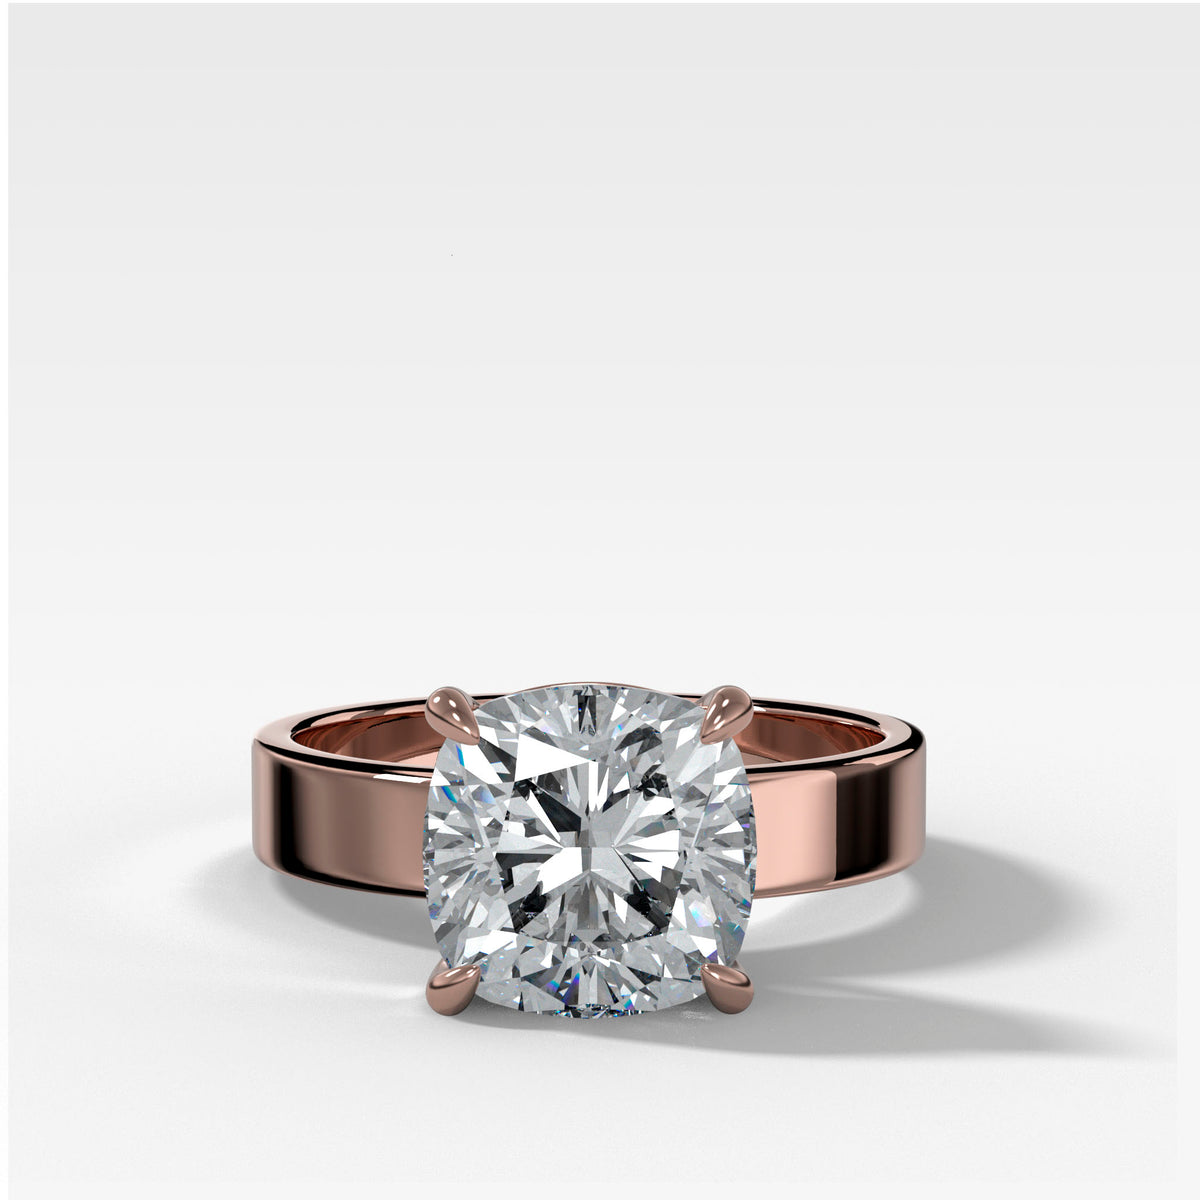 Finest Solitaire Engagement Ring With Cushion Cut Diamond